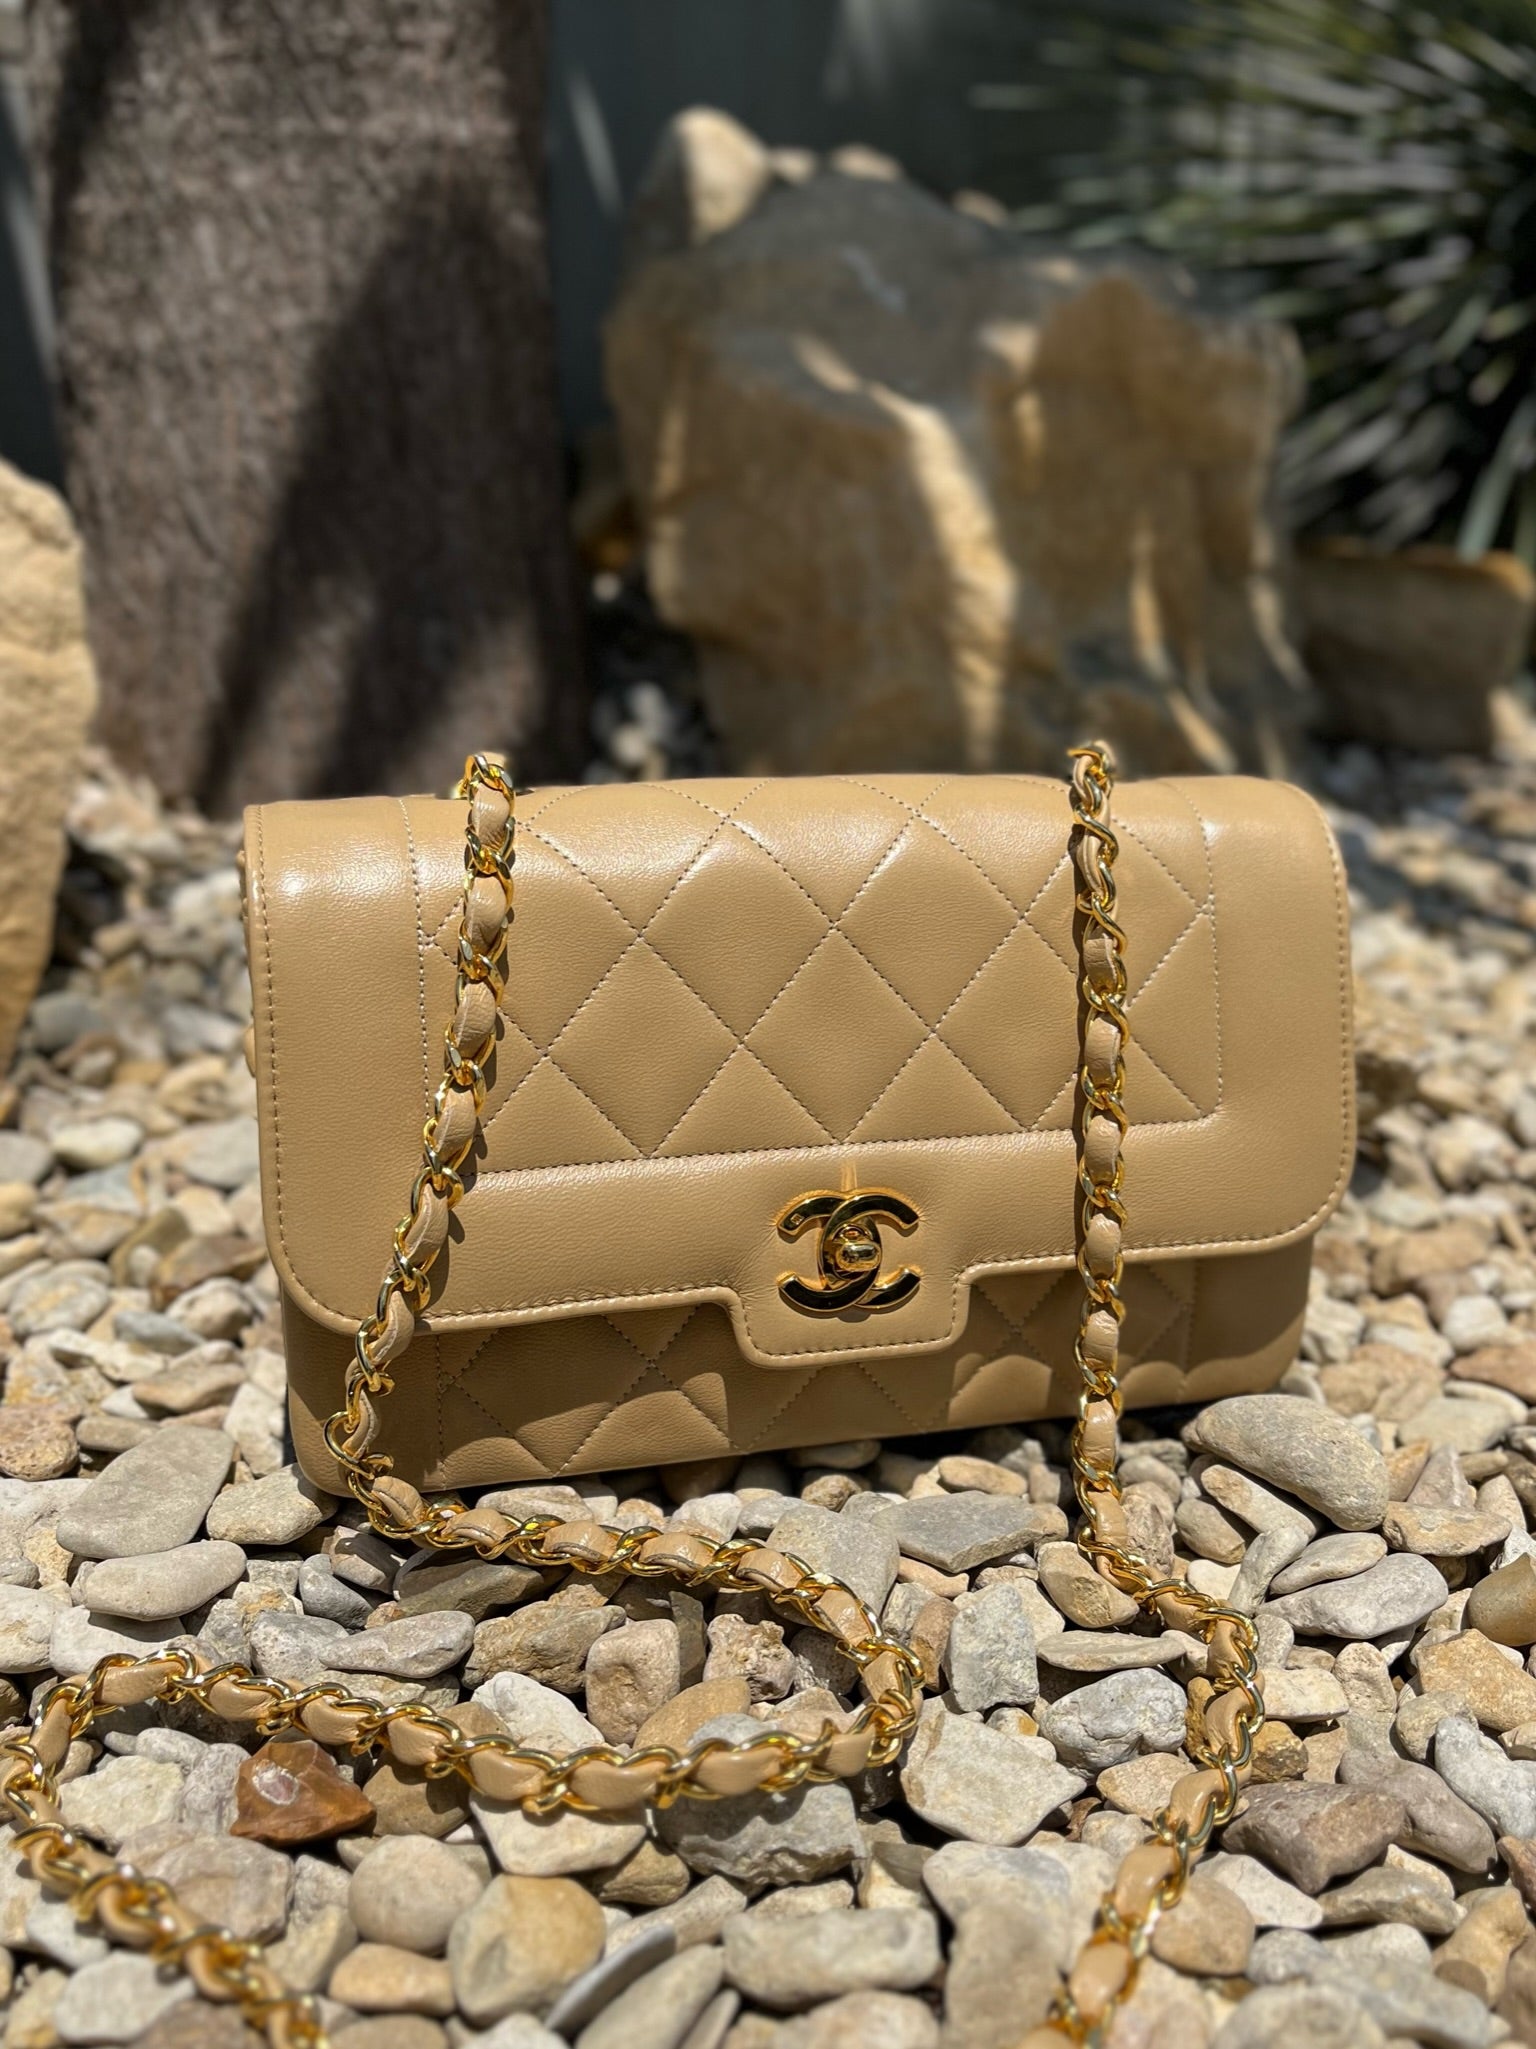 Sold at Auction: Chanel Quilted Tan Leather Bag